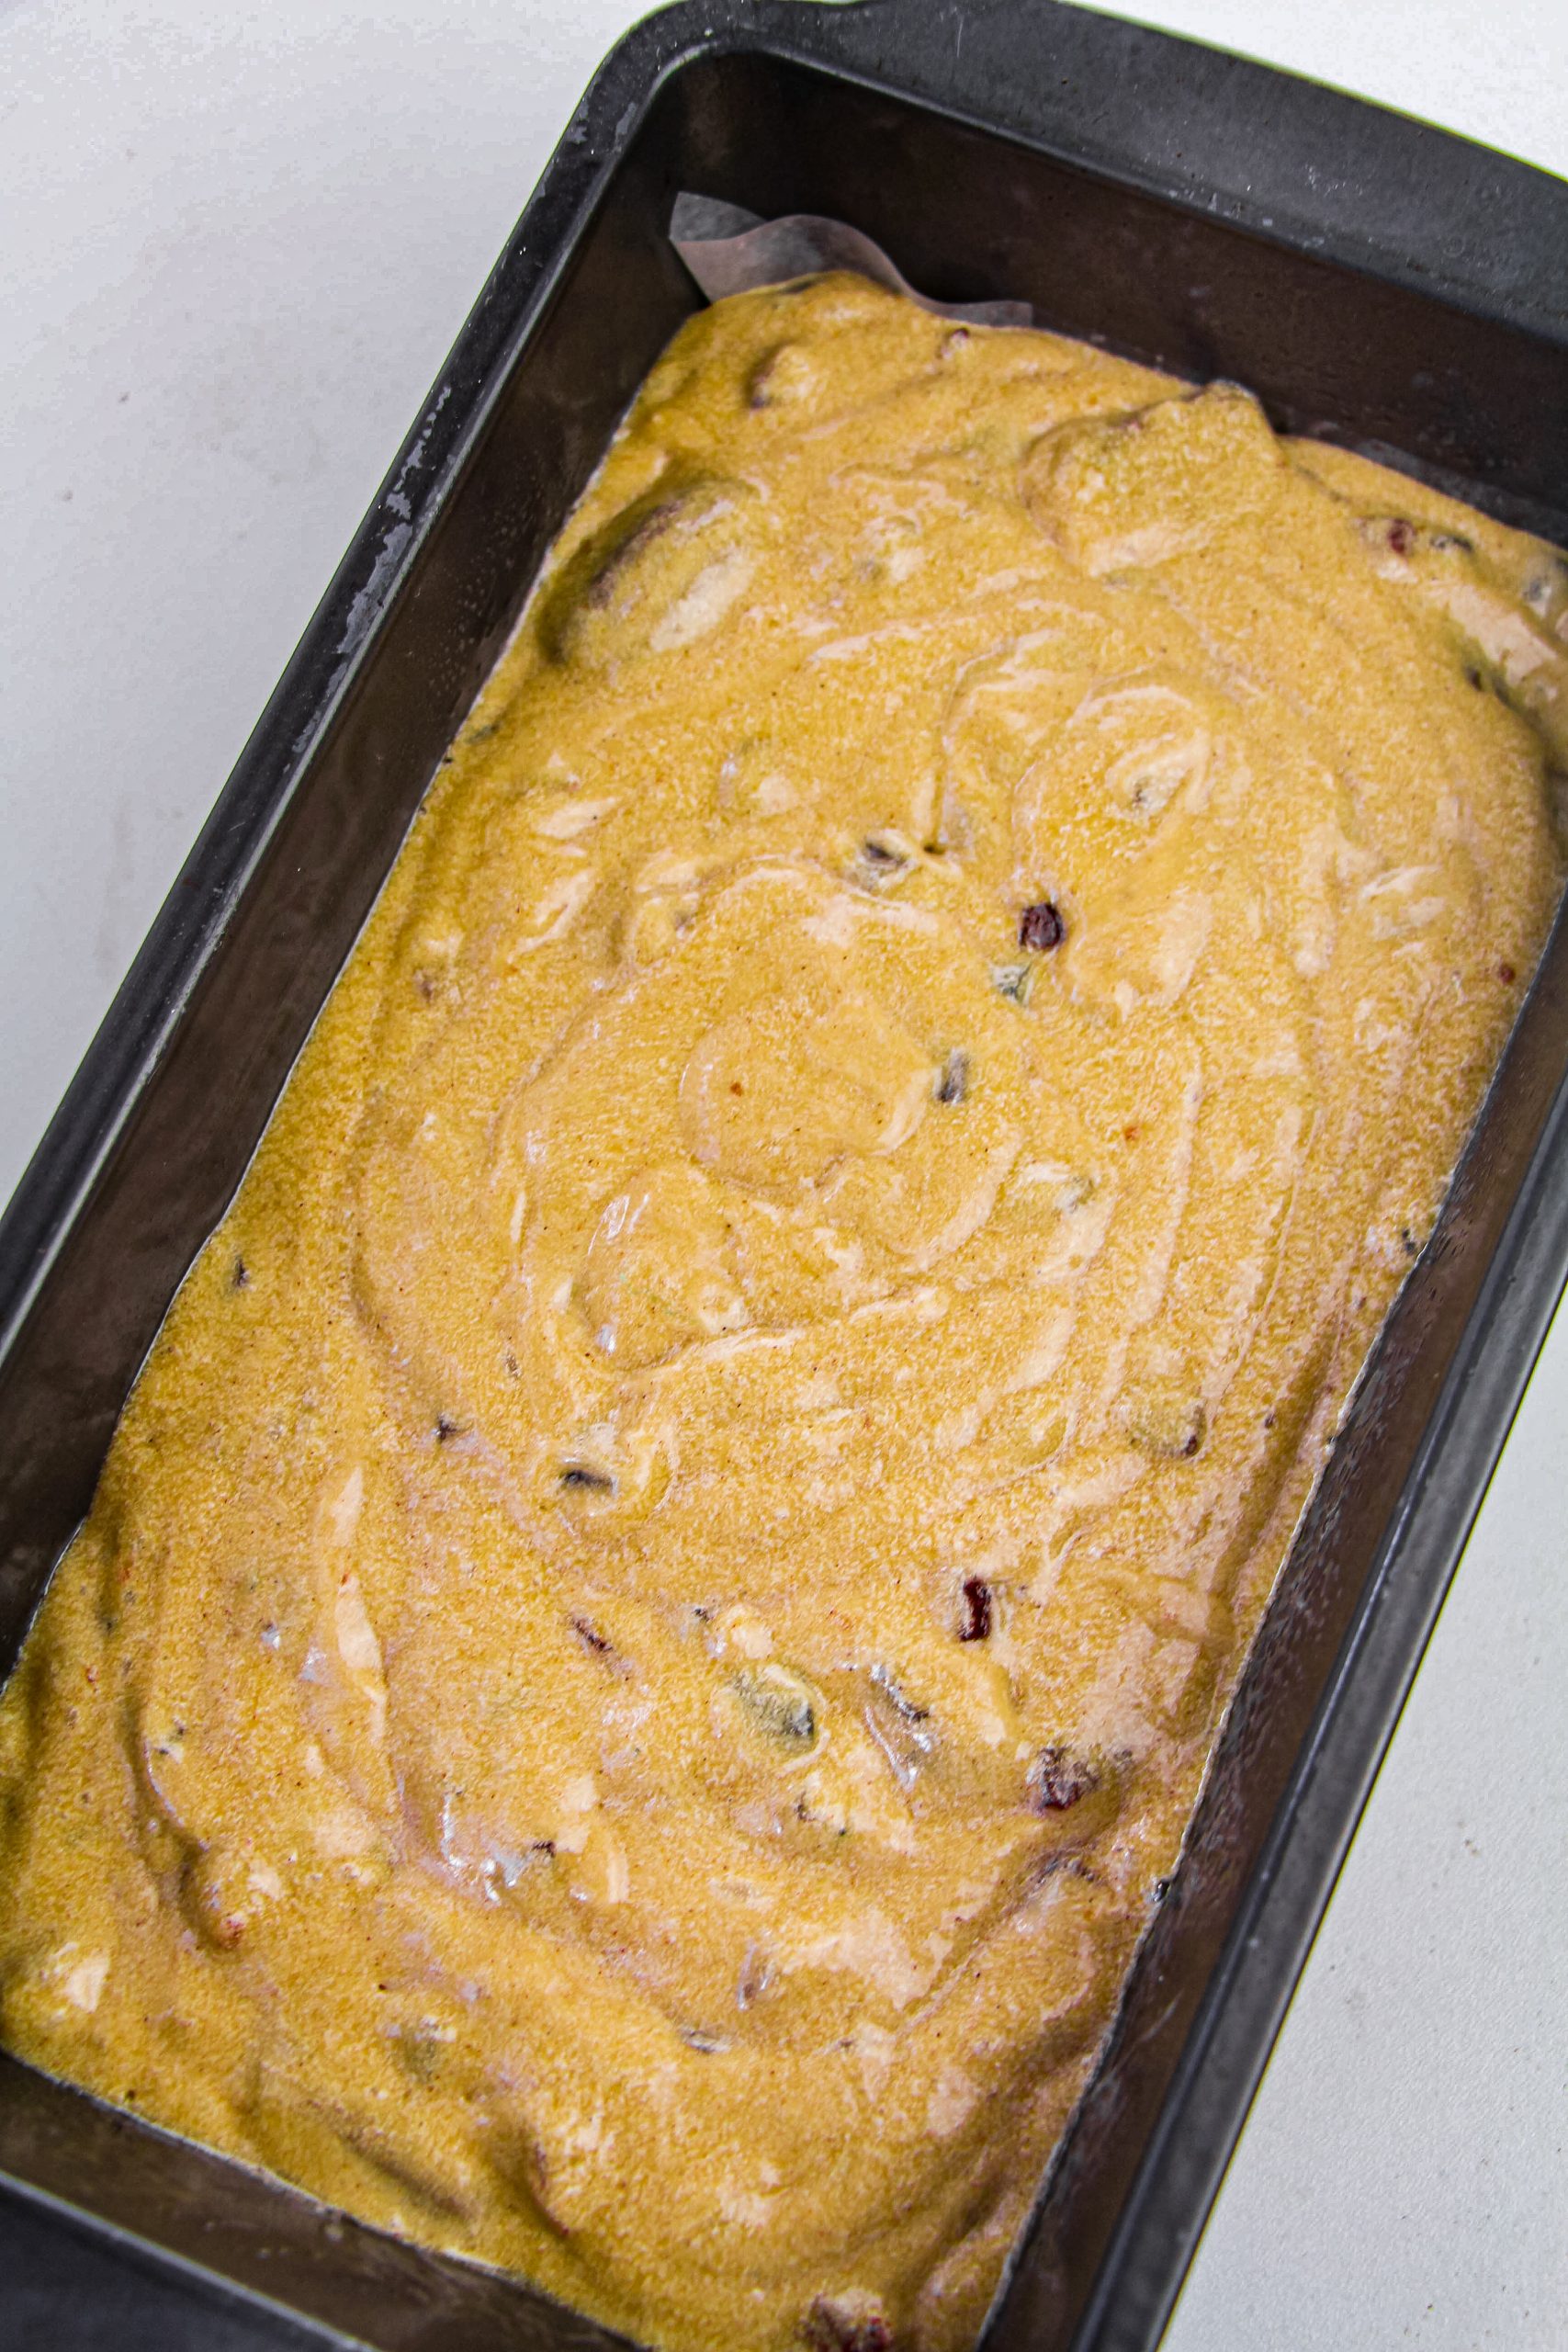 Pour in the fruit cake batter into the loaf pan.